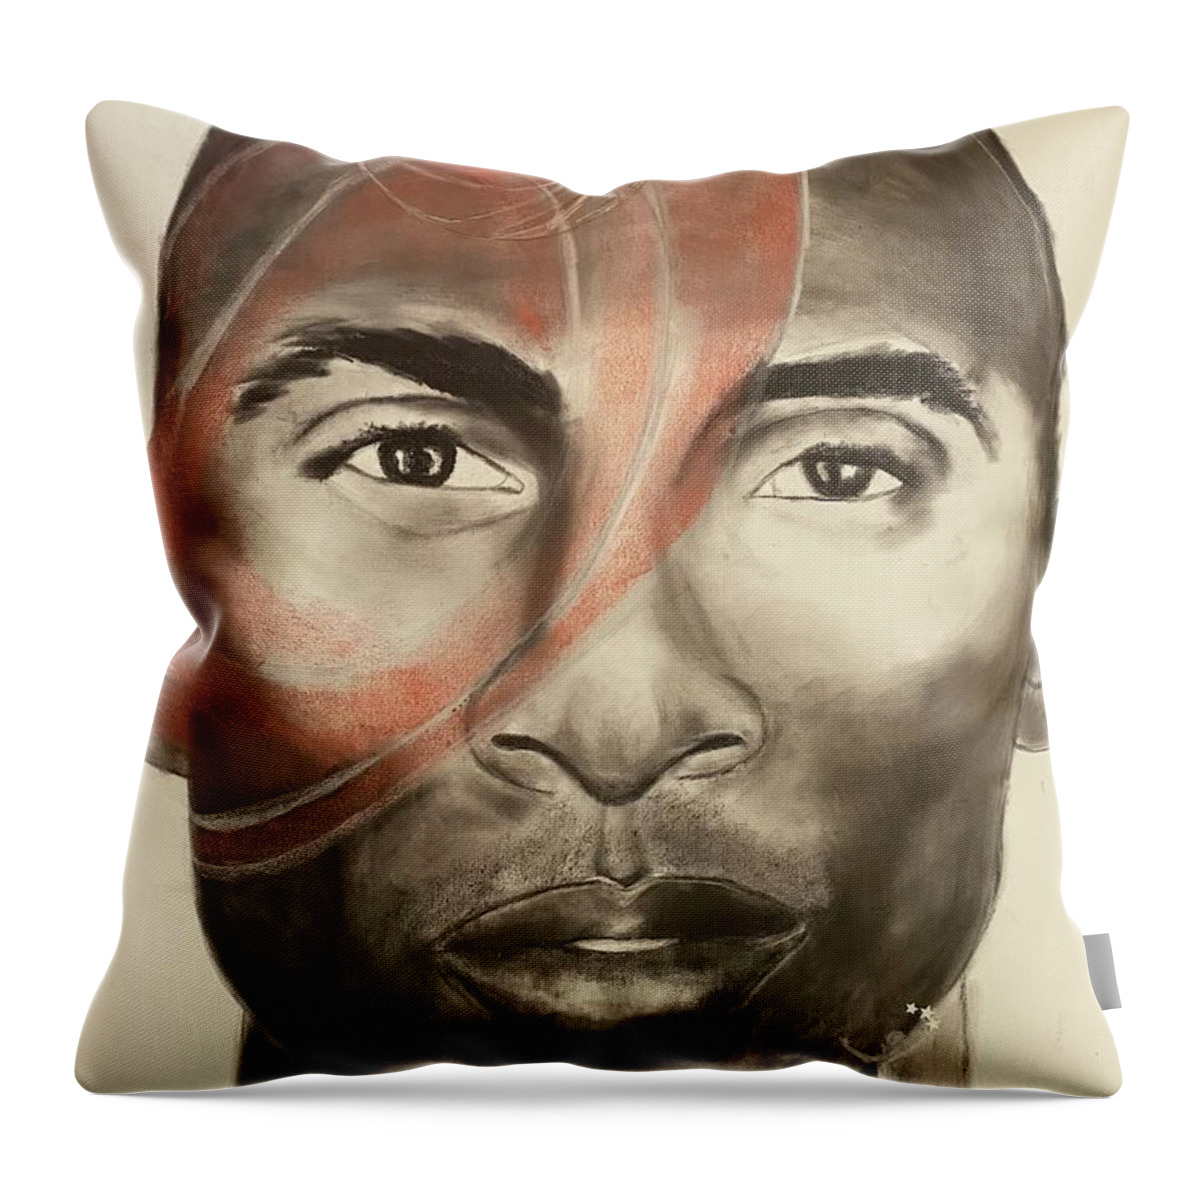  Throw Pillow featuring the mixed media G.o.a.t by Angie ONeal